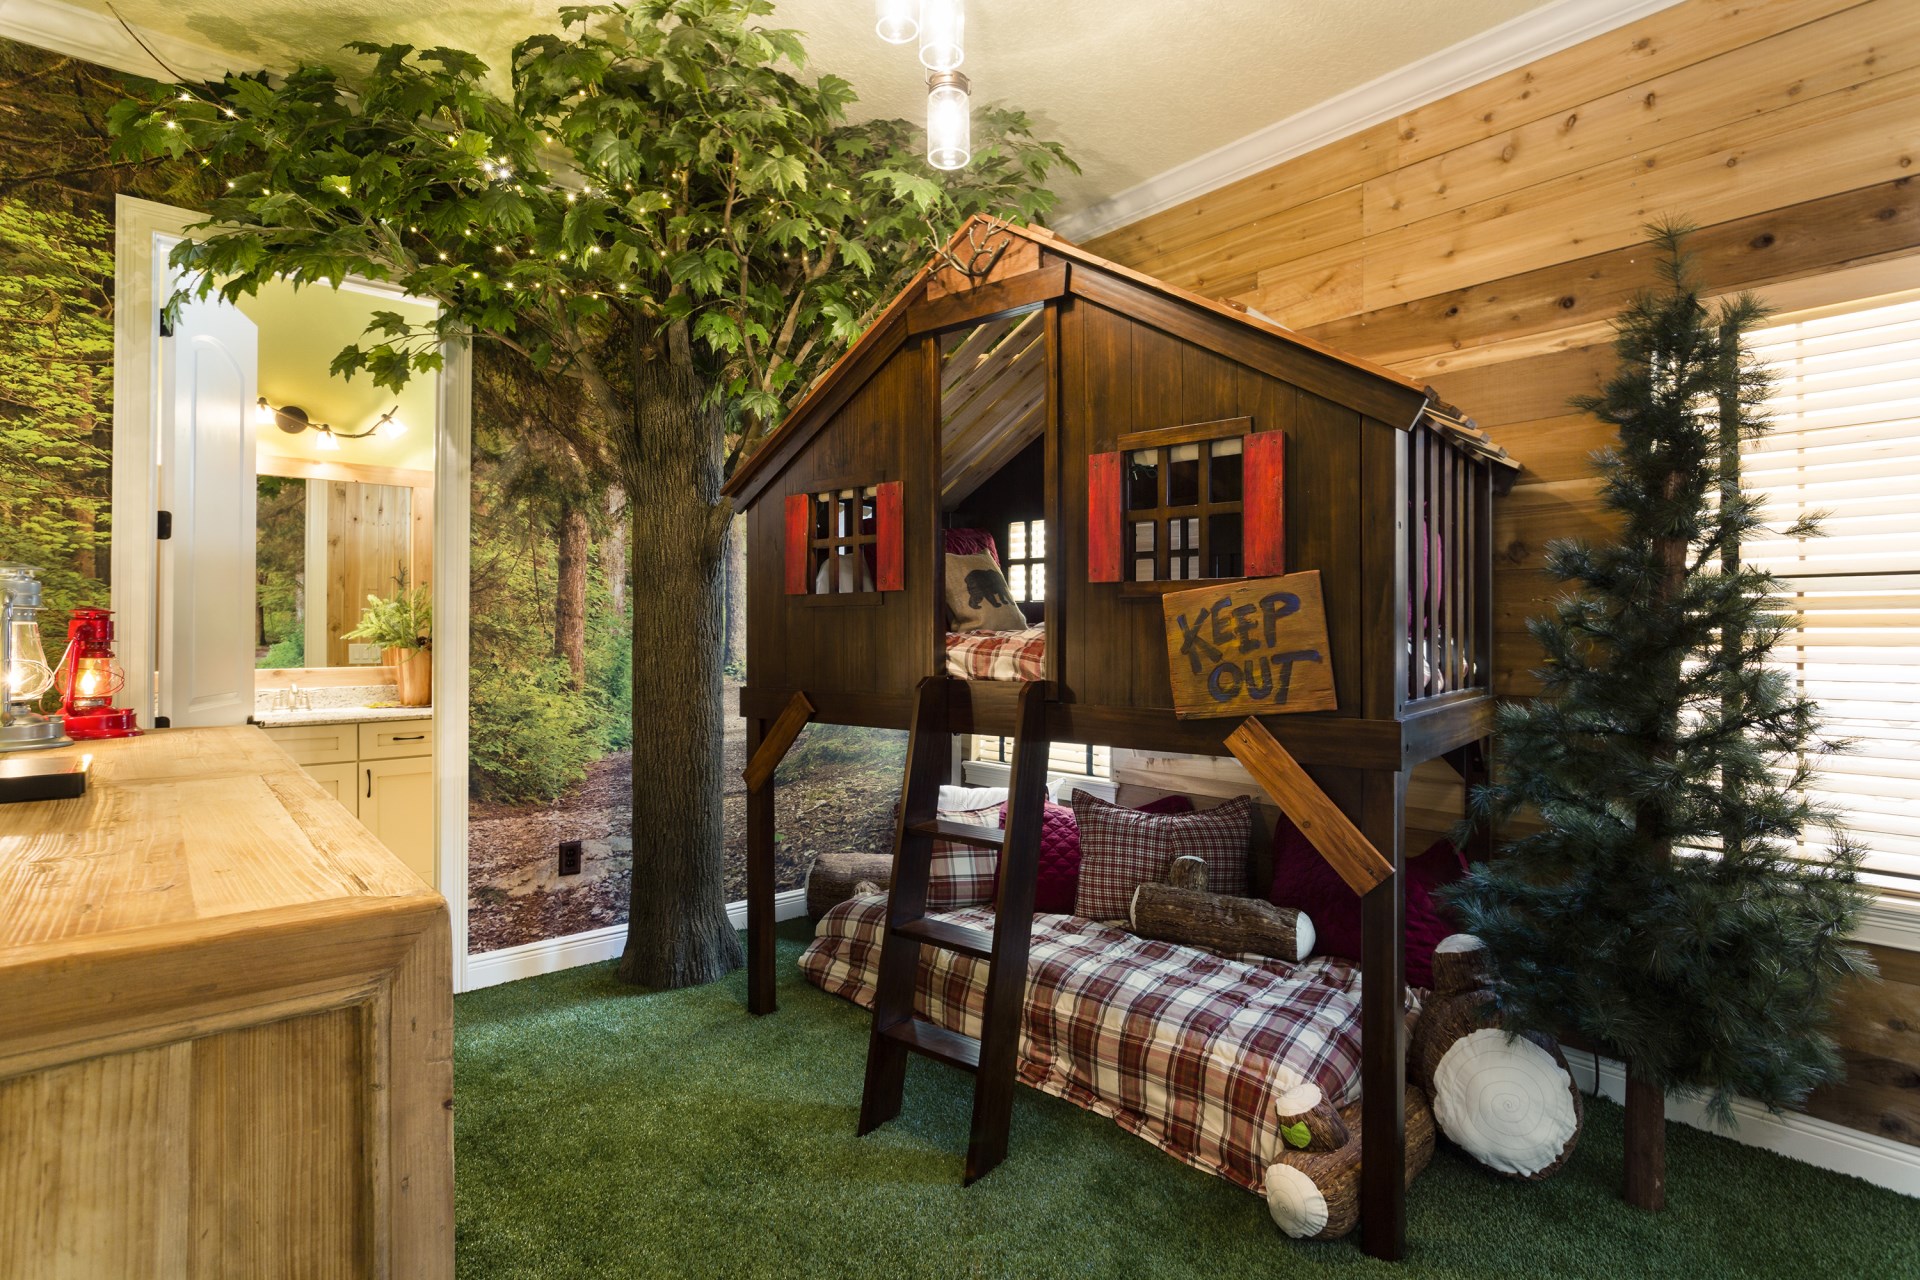 A treehouse theme with bunk beds and fake grass in the kids' bedrooms